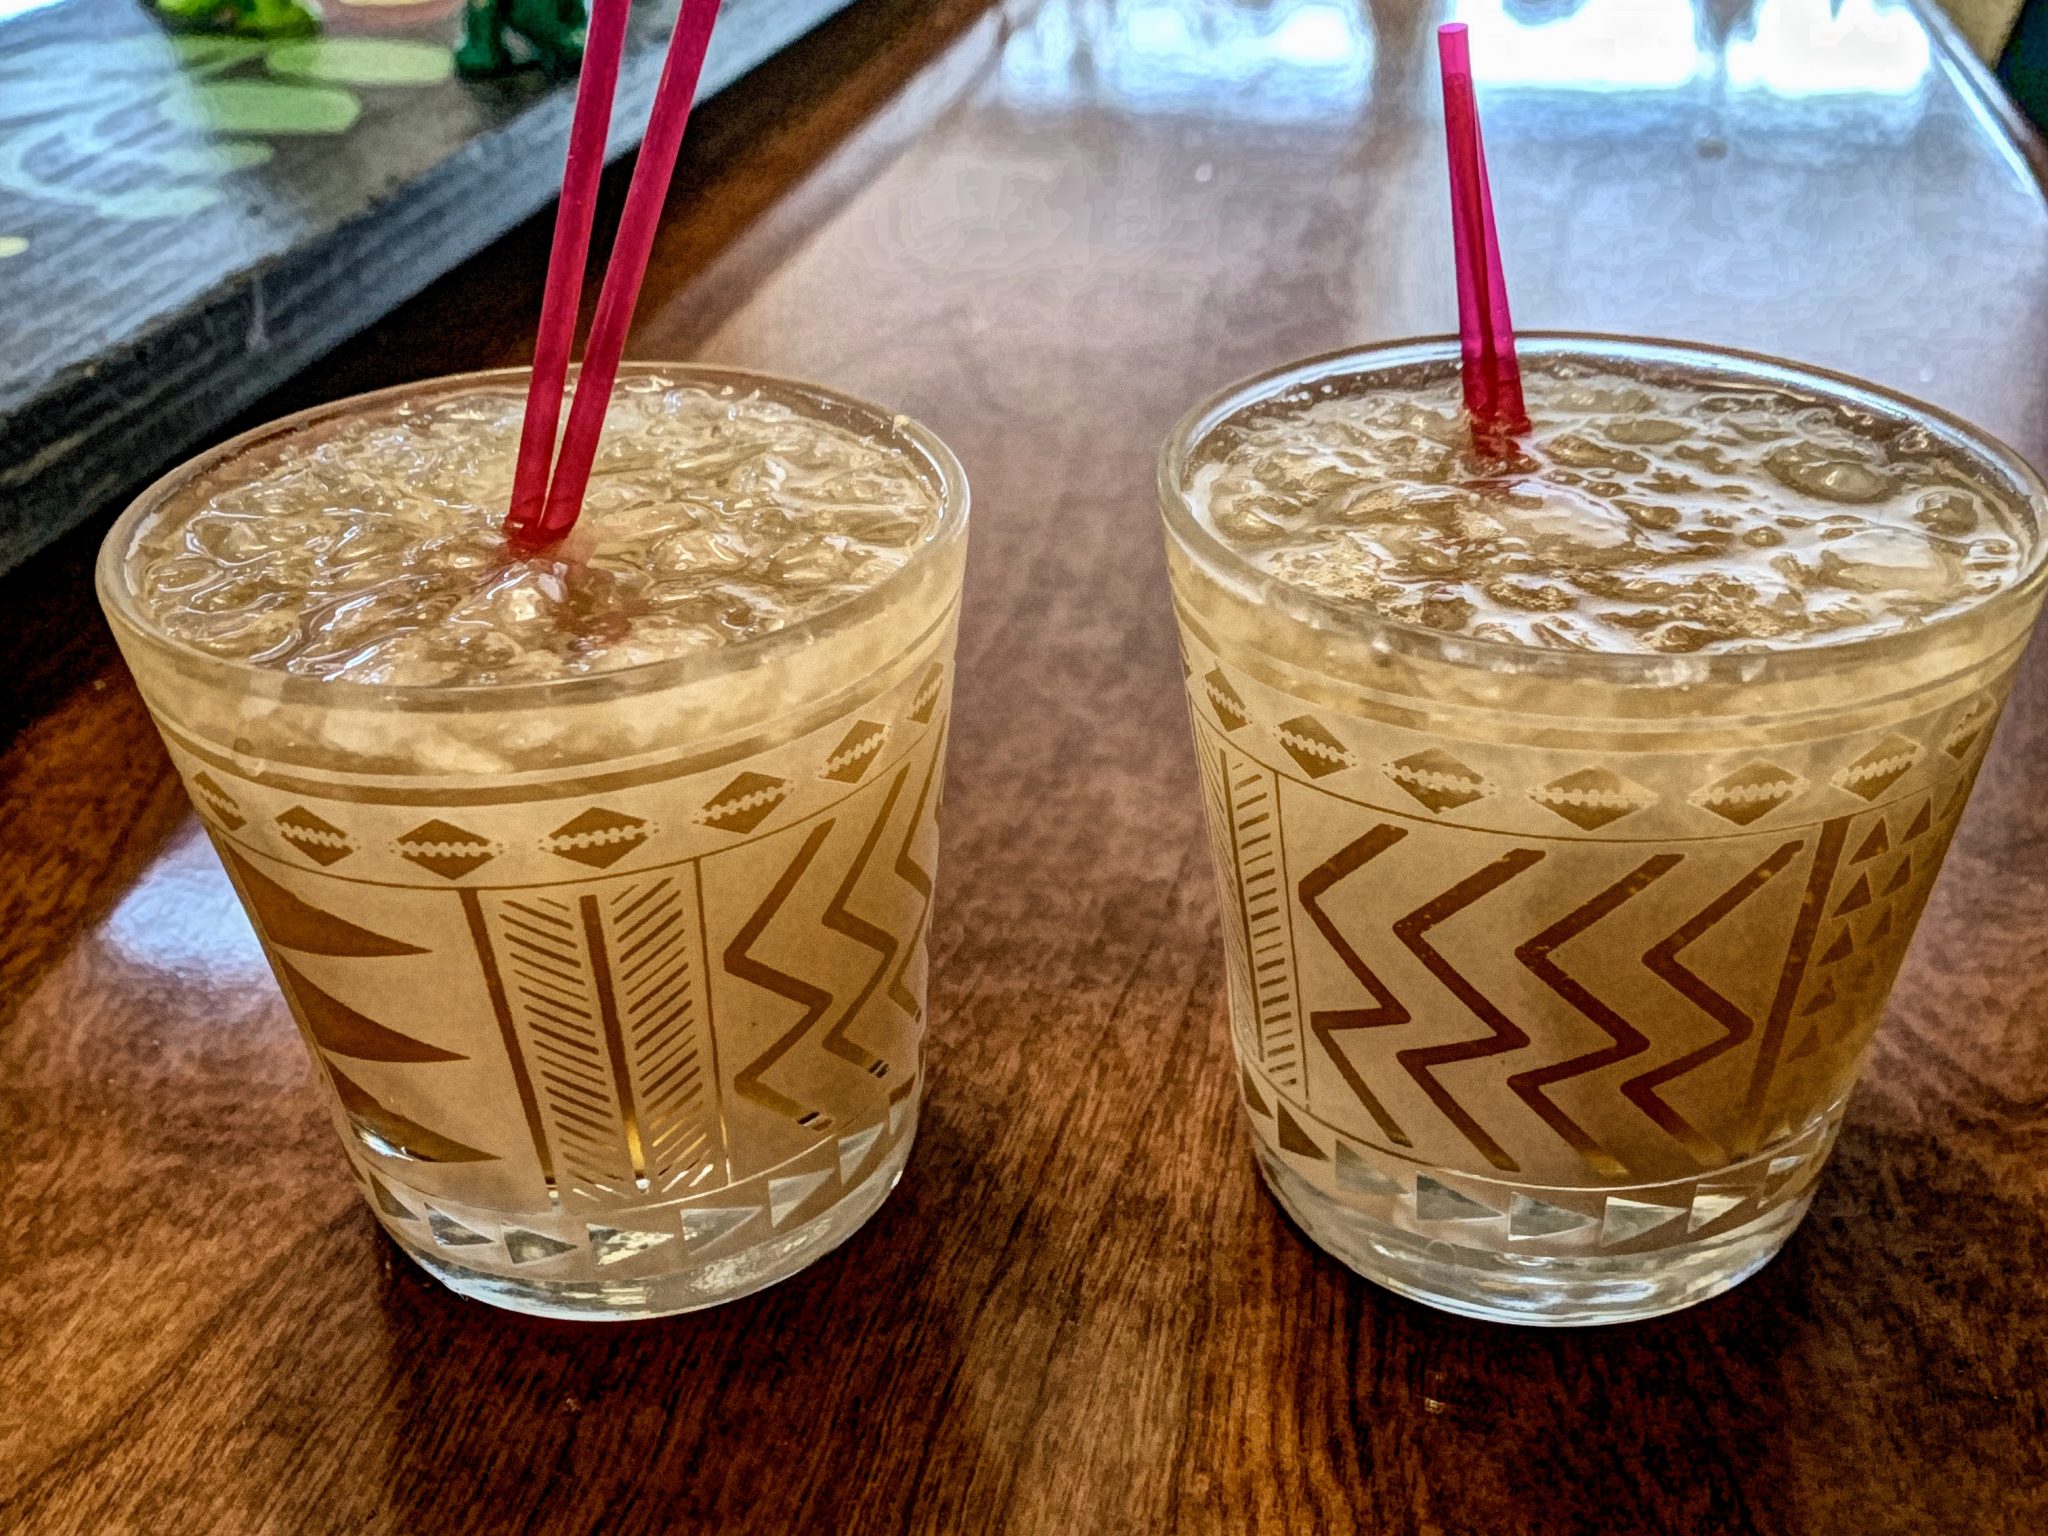 The Search for the Ultimate Navy Grog – The Search for the Ultimate Mai Tai